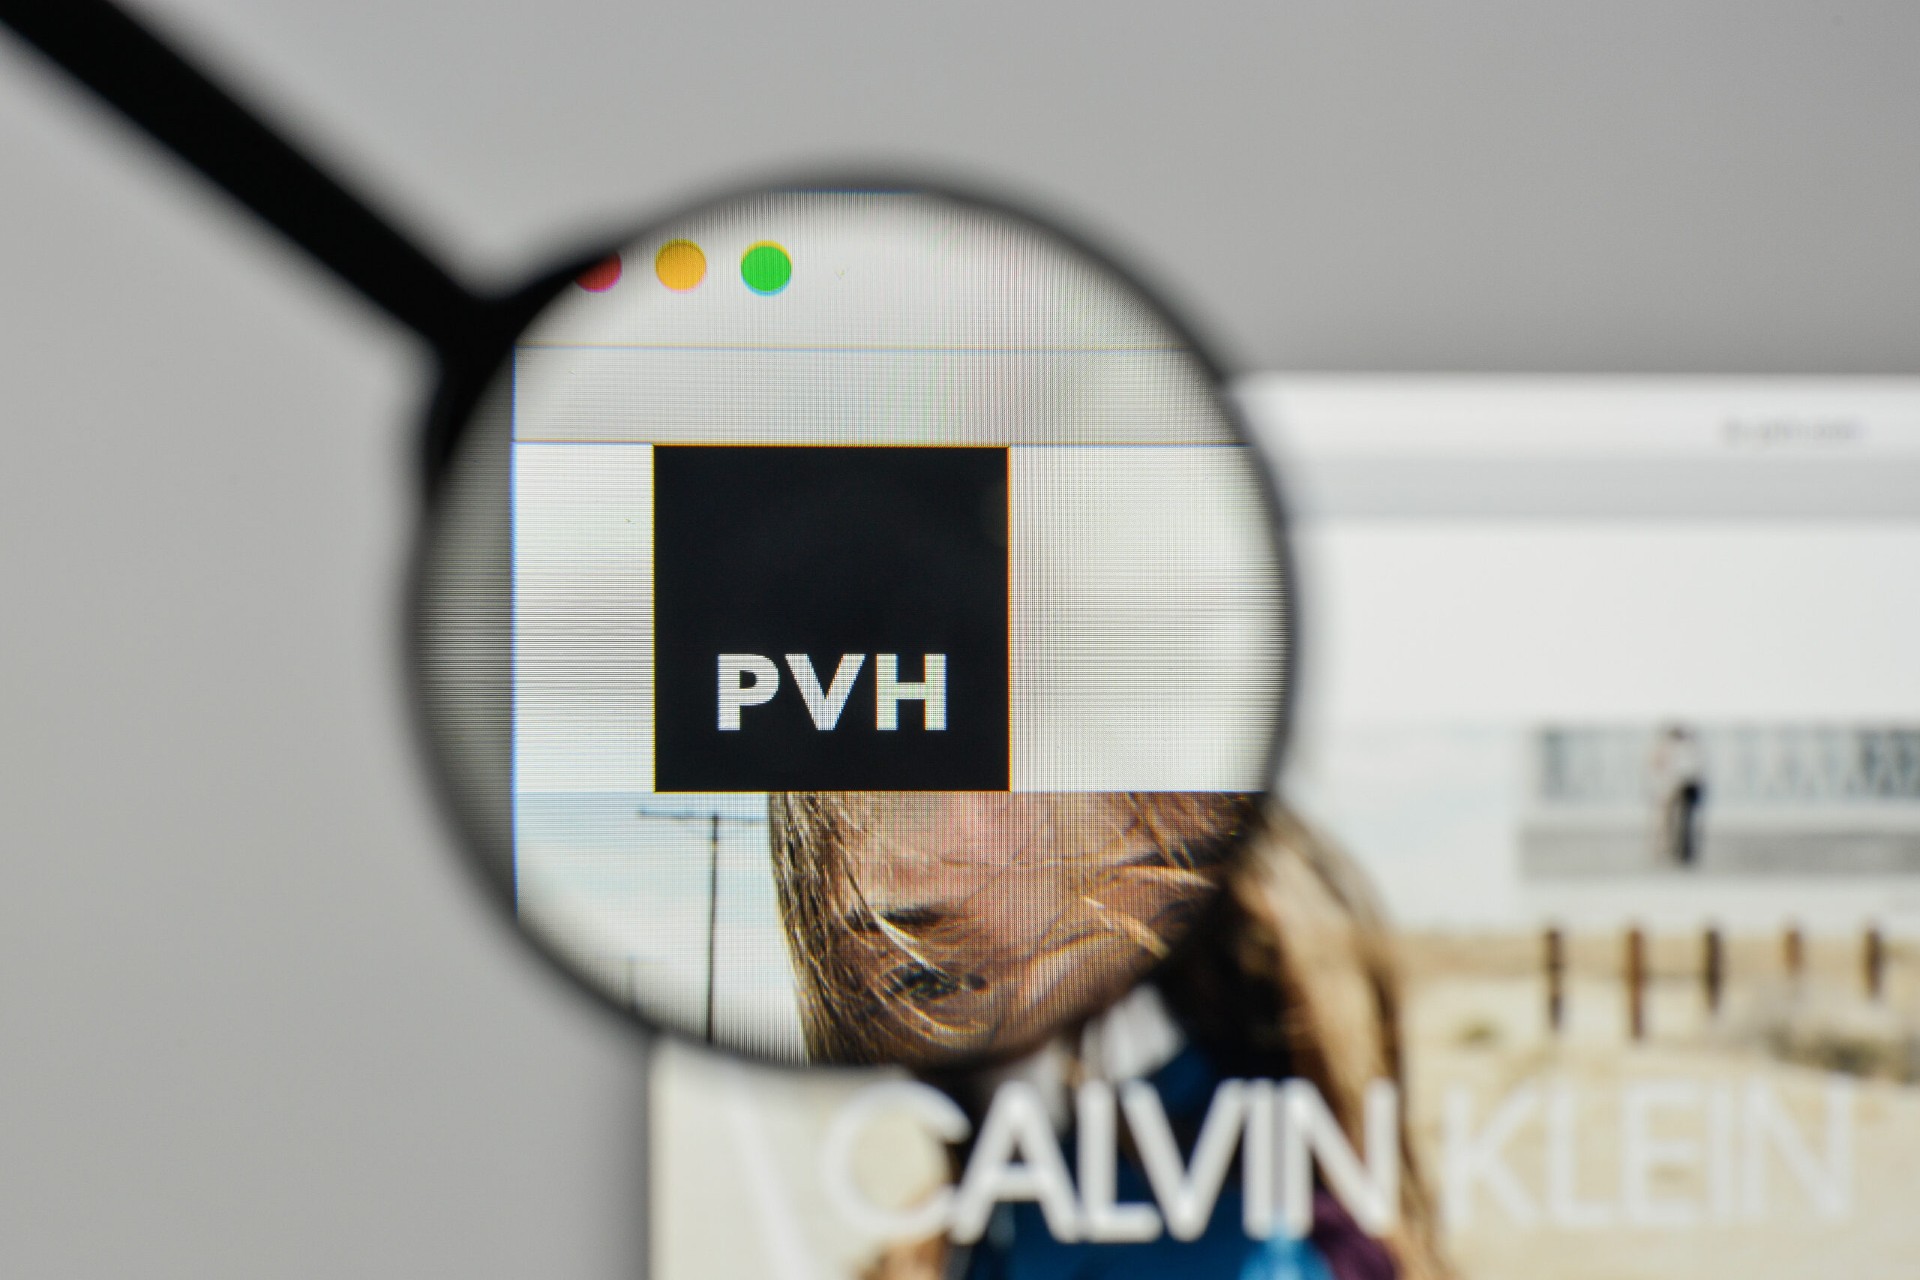 PVH Corp. publishes its 2021 Corporate Responsibility report